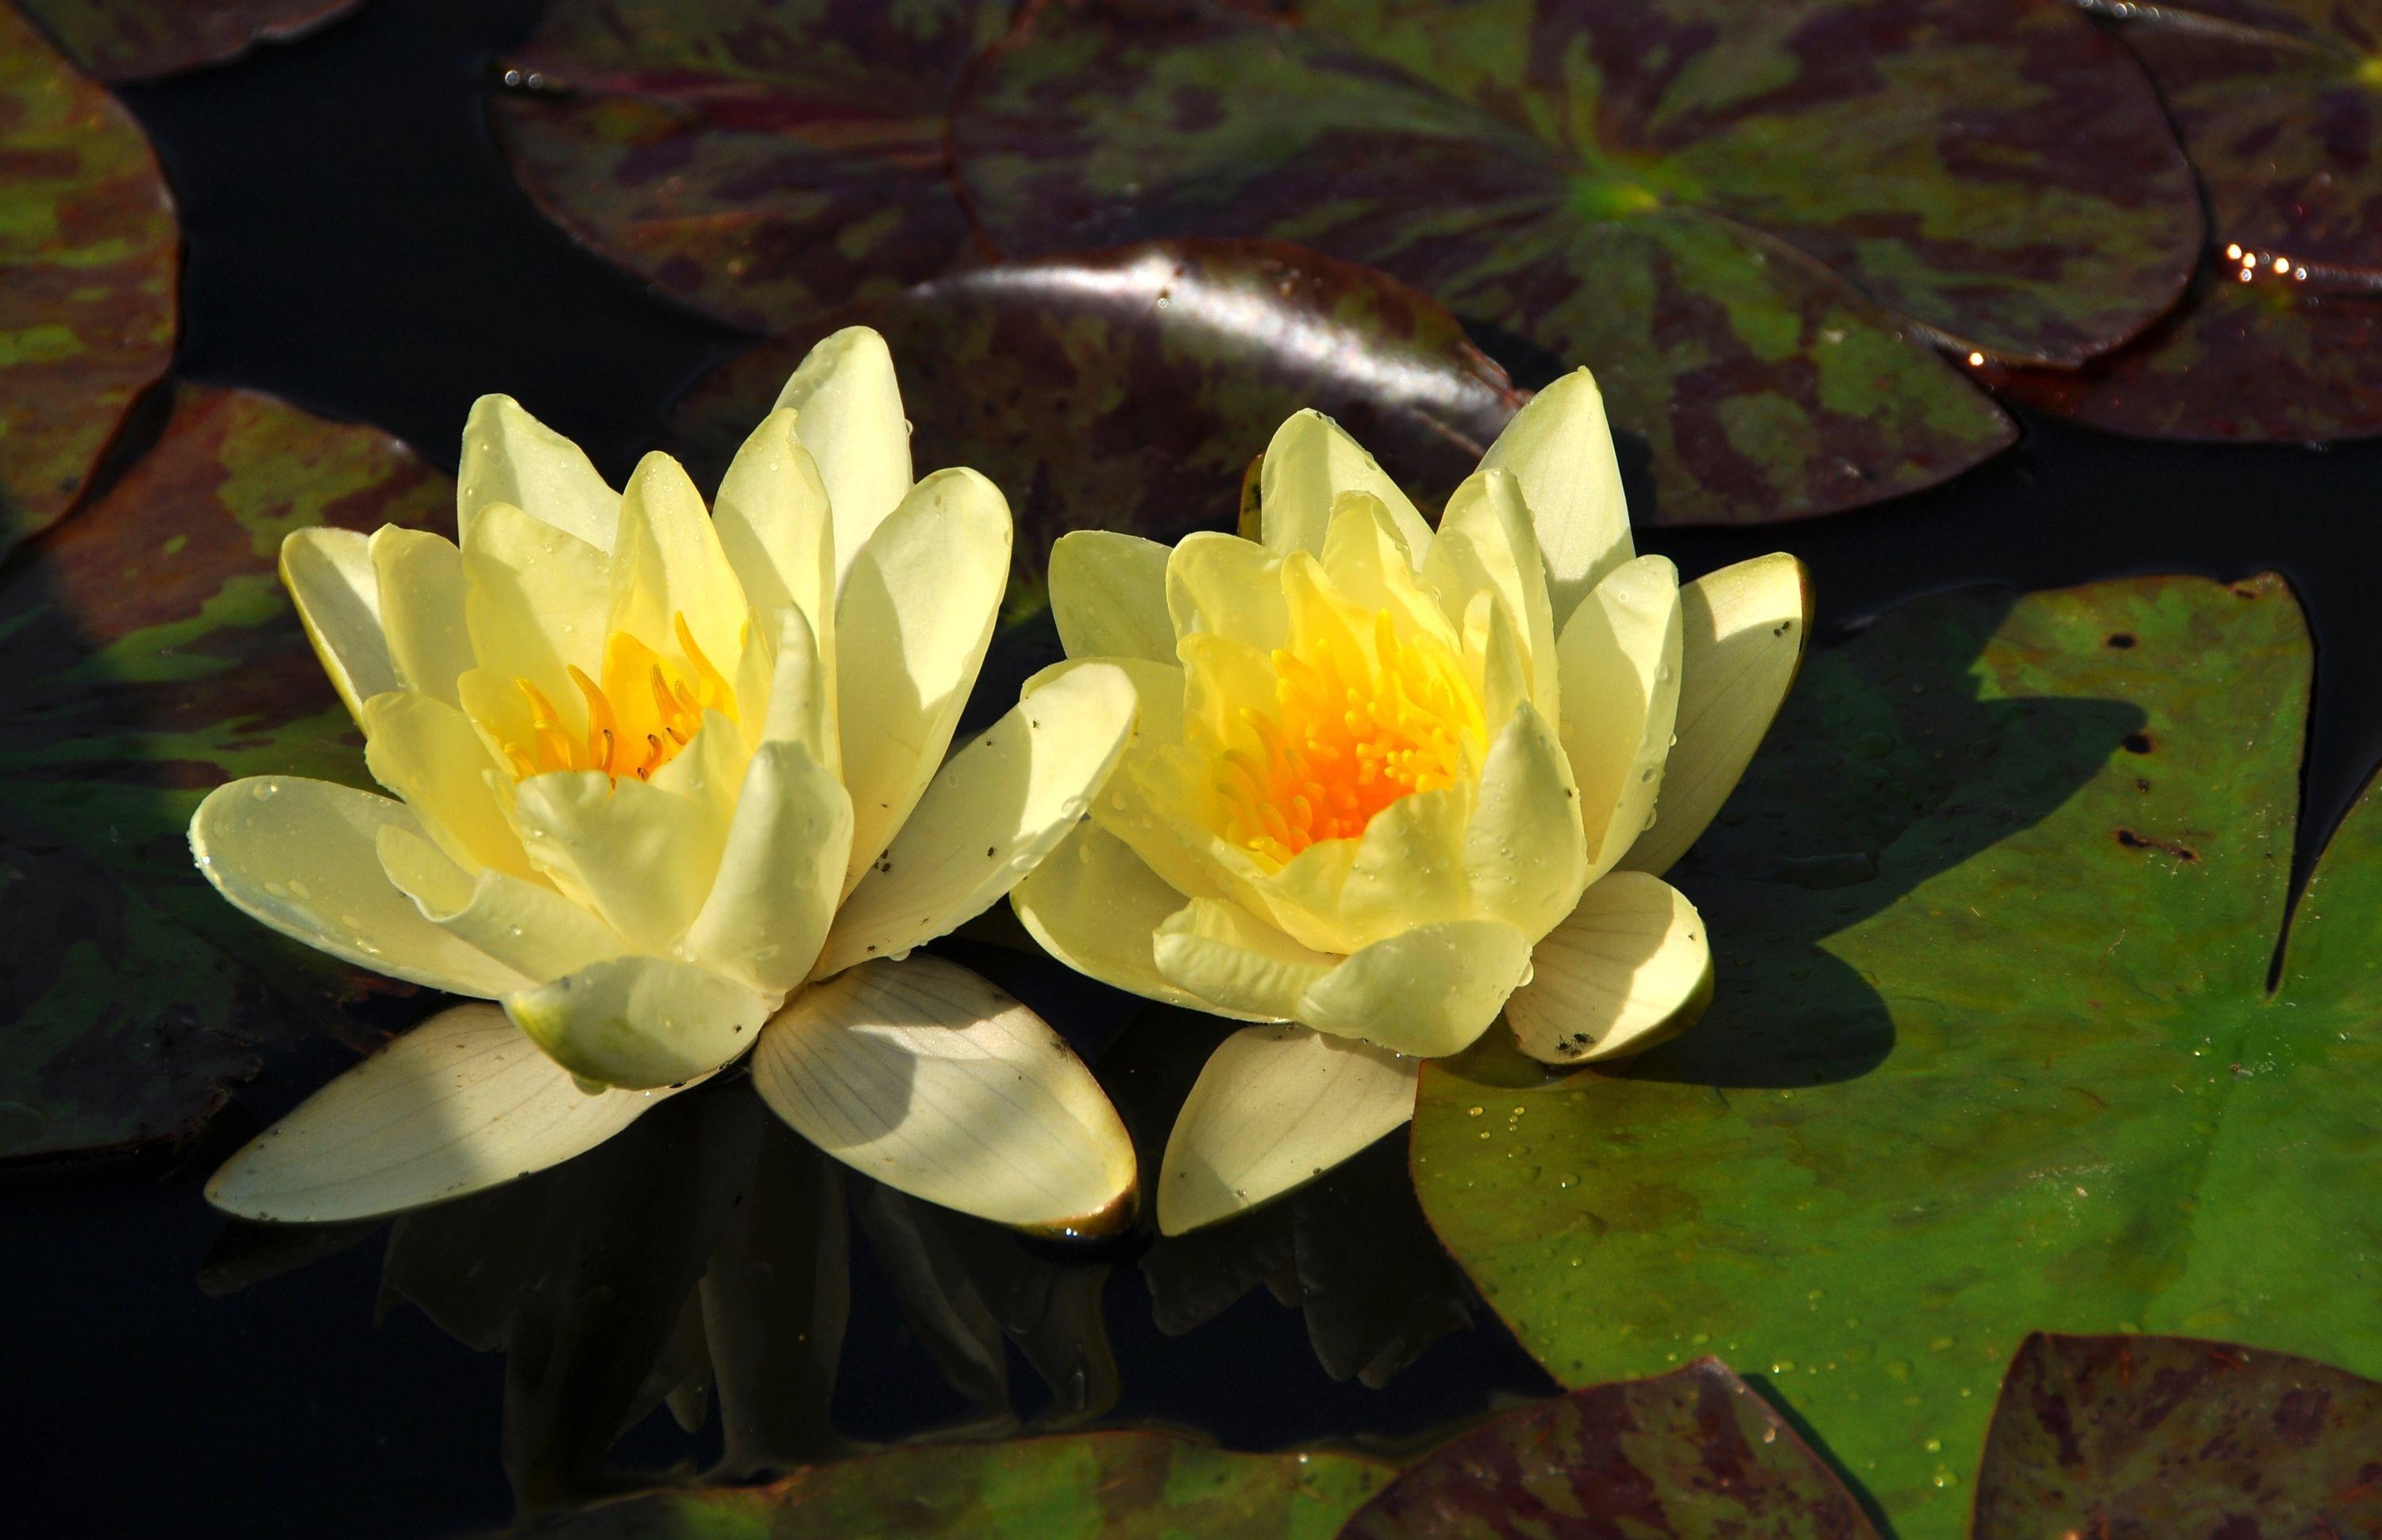 The water lily is yellow in color